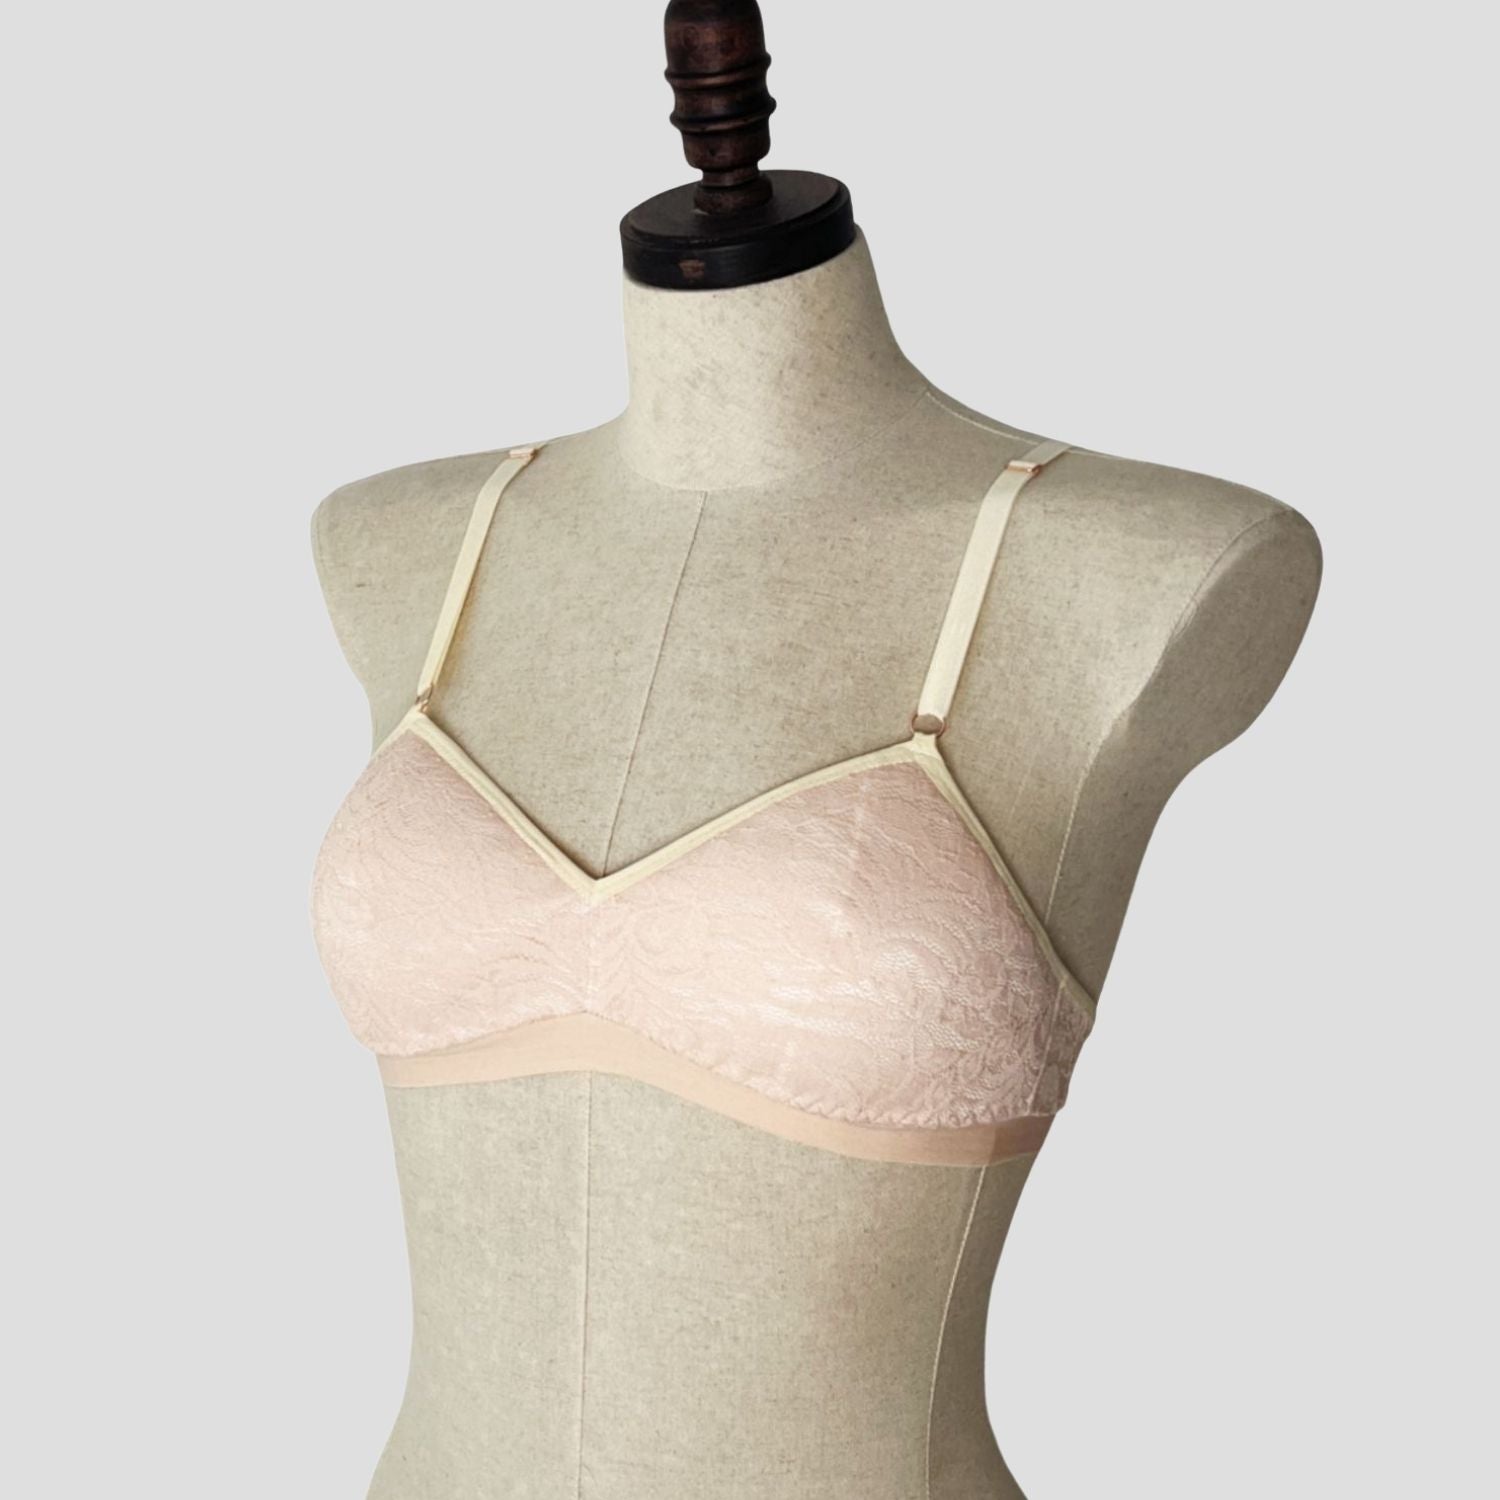 Peach lace bra with padding | Made in Canada